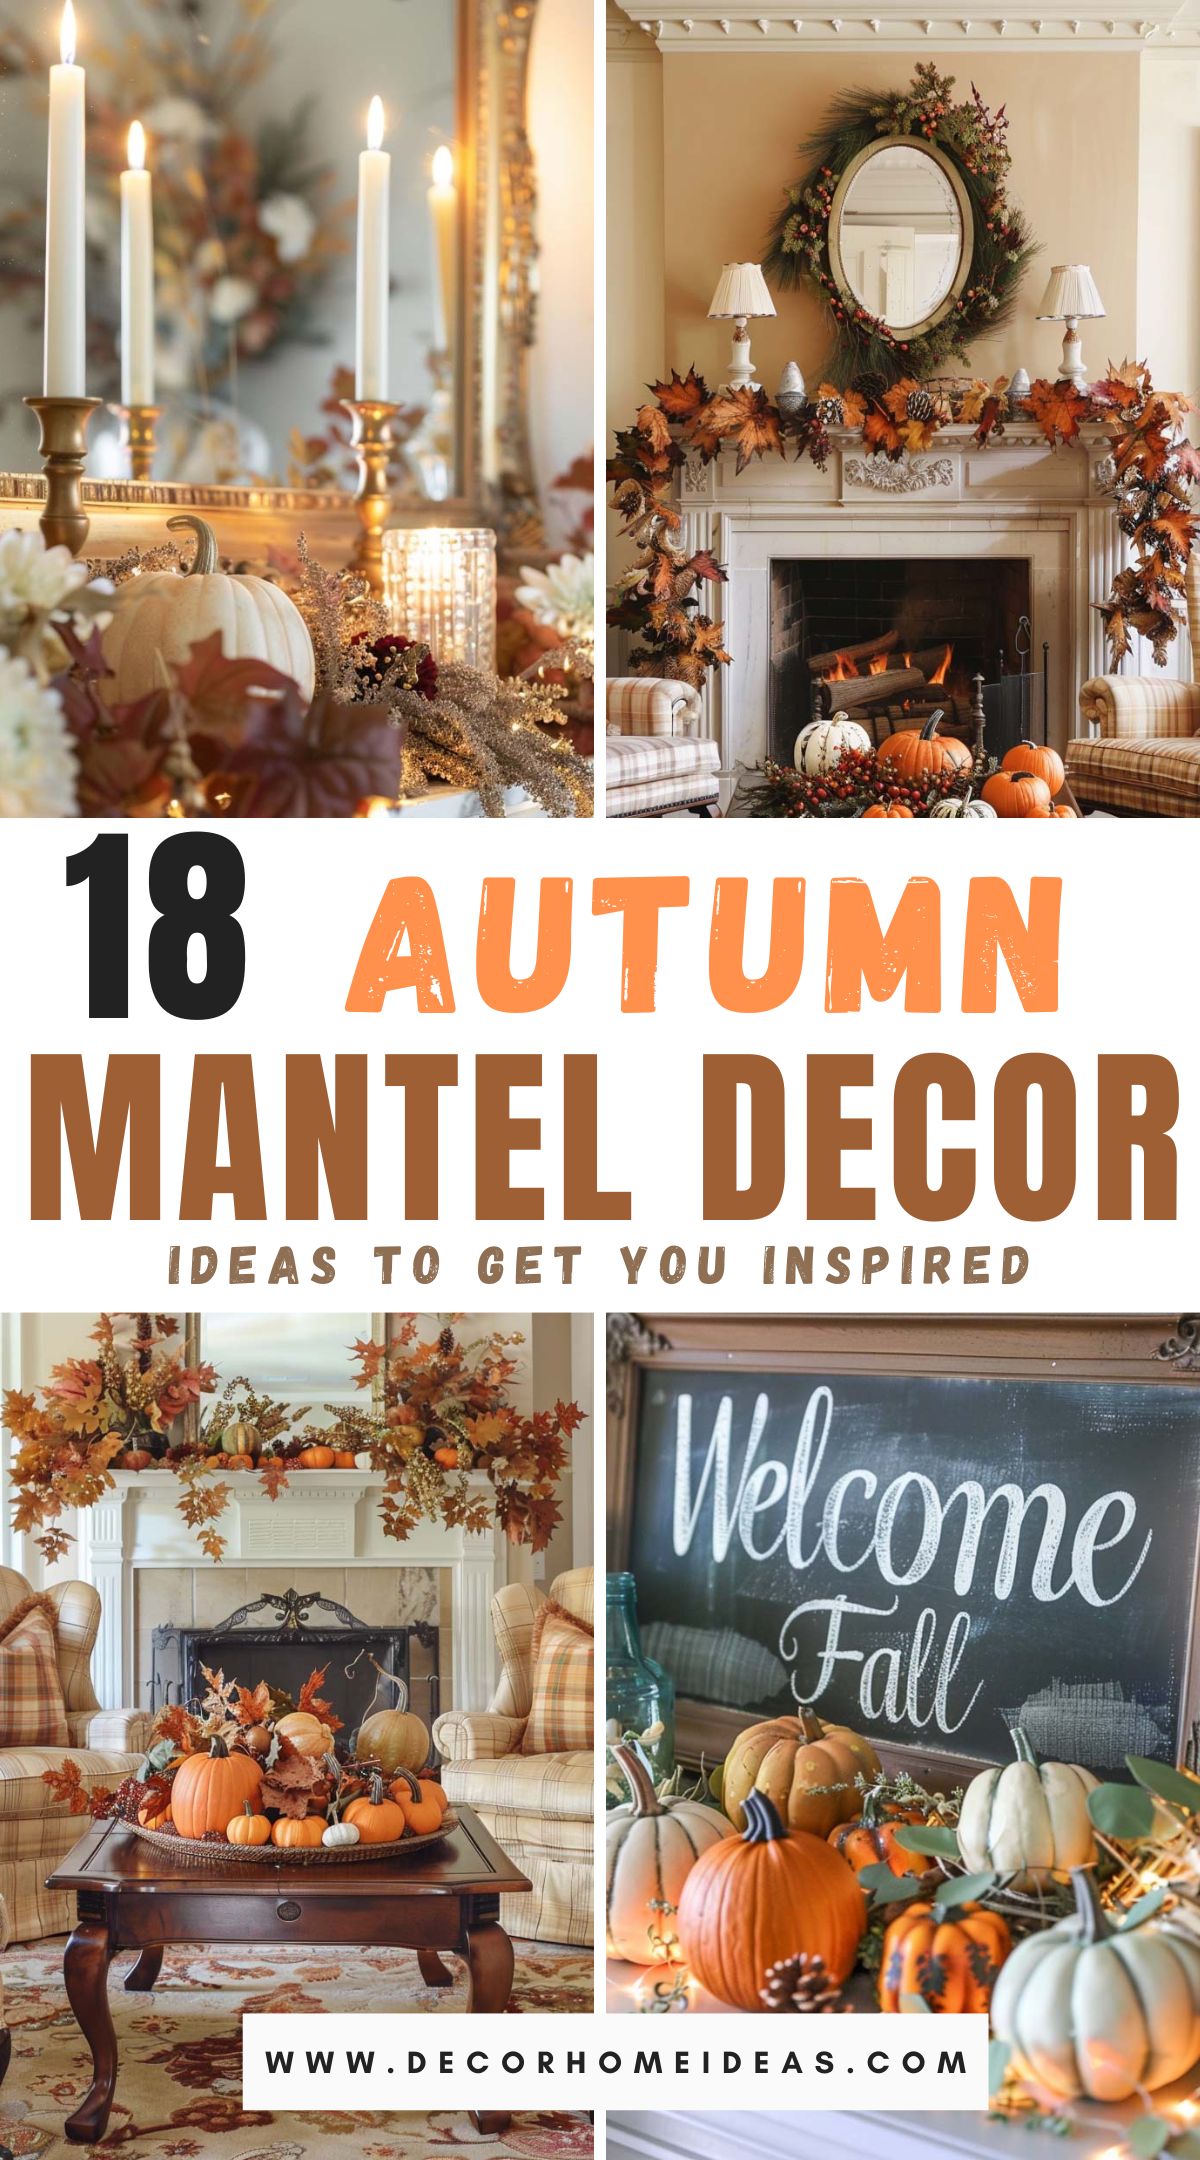 Get inspired this season with 18 charming autumn mantel decor ideas. Transform your fireplace into a cozy fall focal point with rustic wreaths, vibrant pumpkins, and warm candles. Explore creative arrangements featuring seasonal foliage, gourds, and plaid accents to bring the beauty and warmth of autumn into your home.